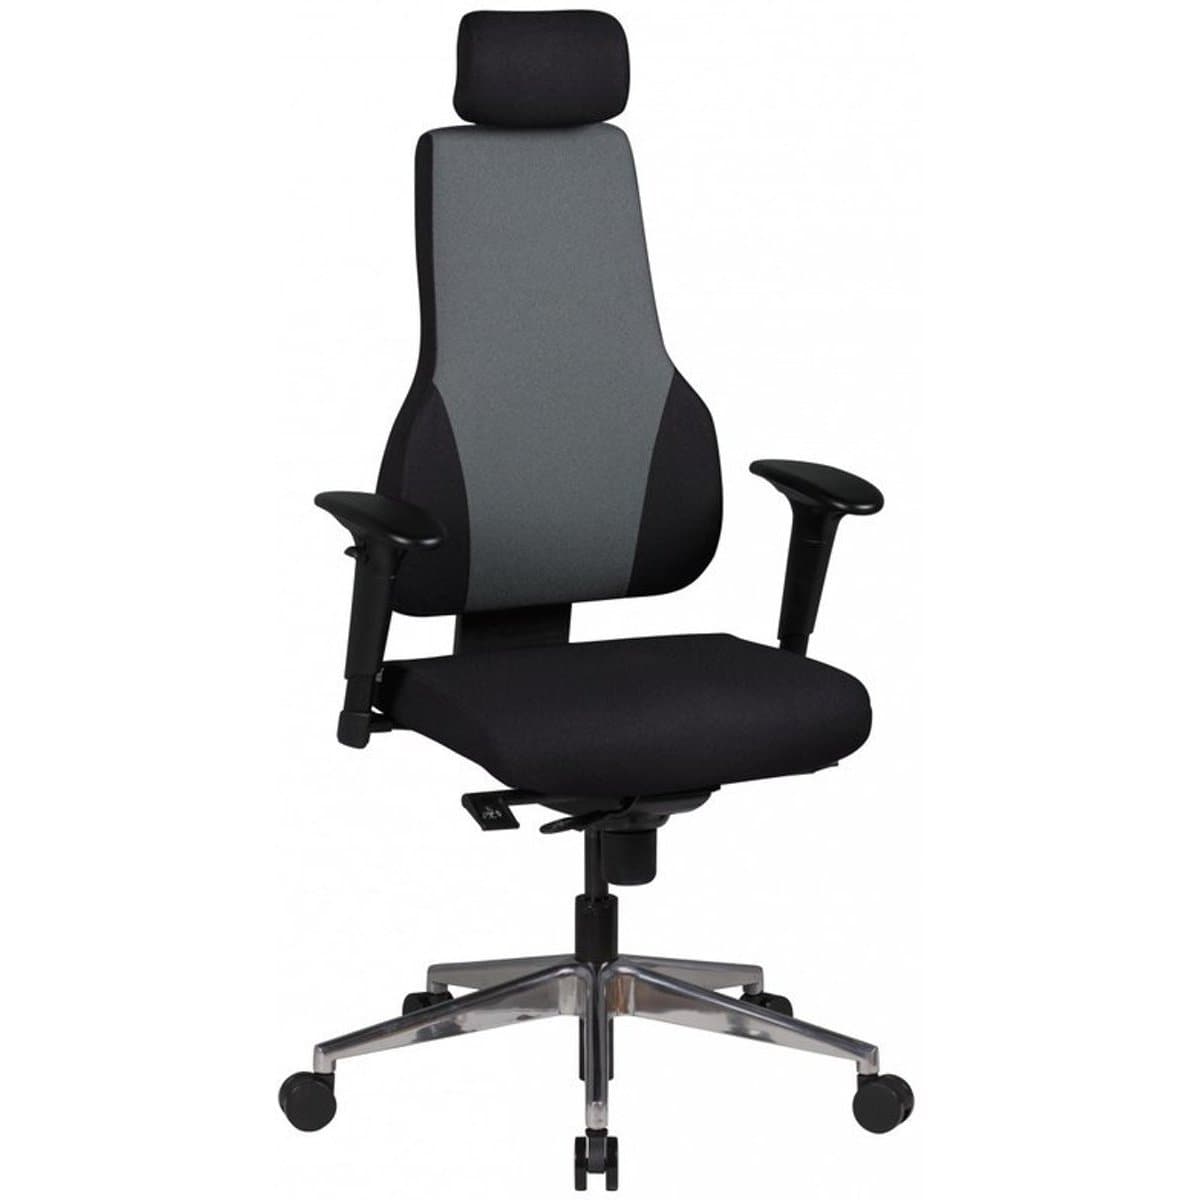 Nancy's Fieldston Office Chair - Executive Chair - Ergonomic Swivel Chair - Office Chairs for Adults - High Seating Comfort